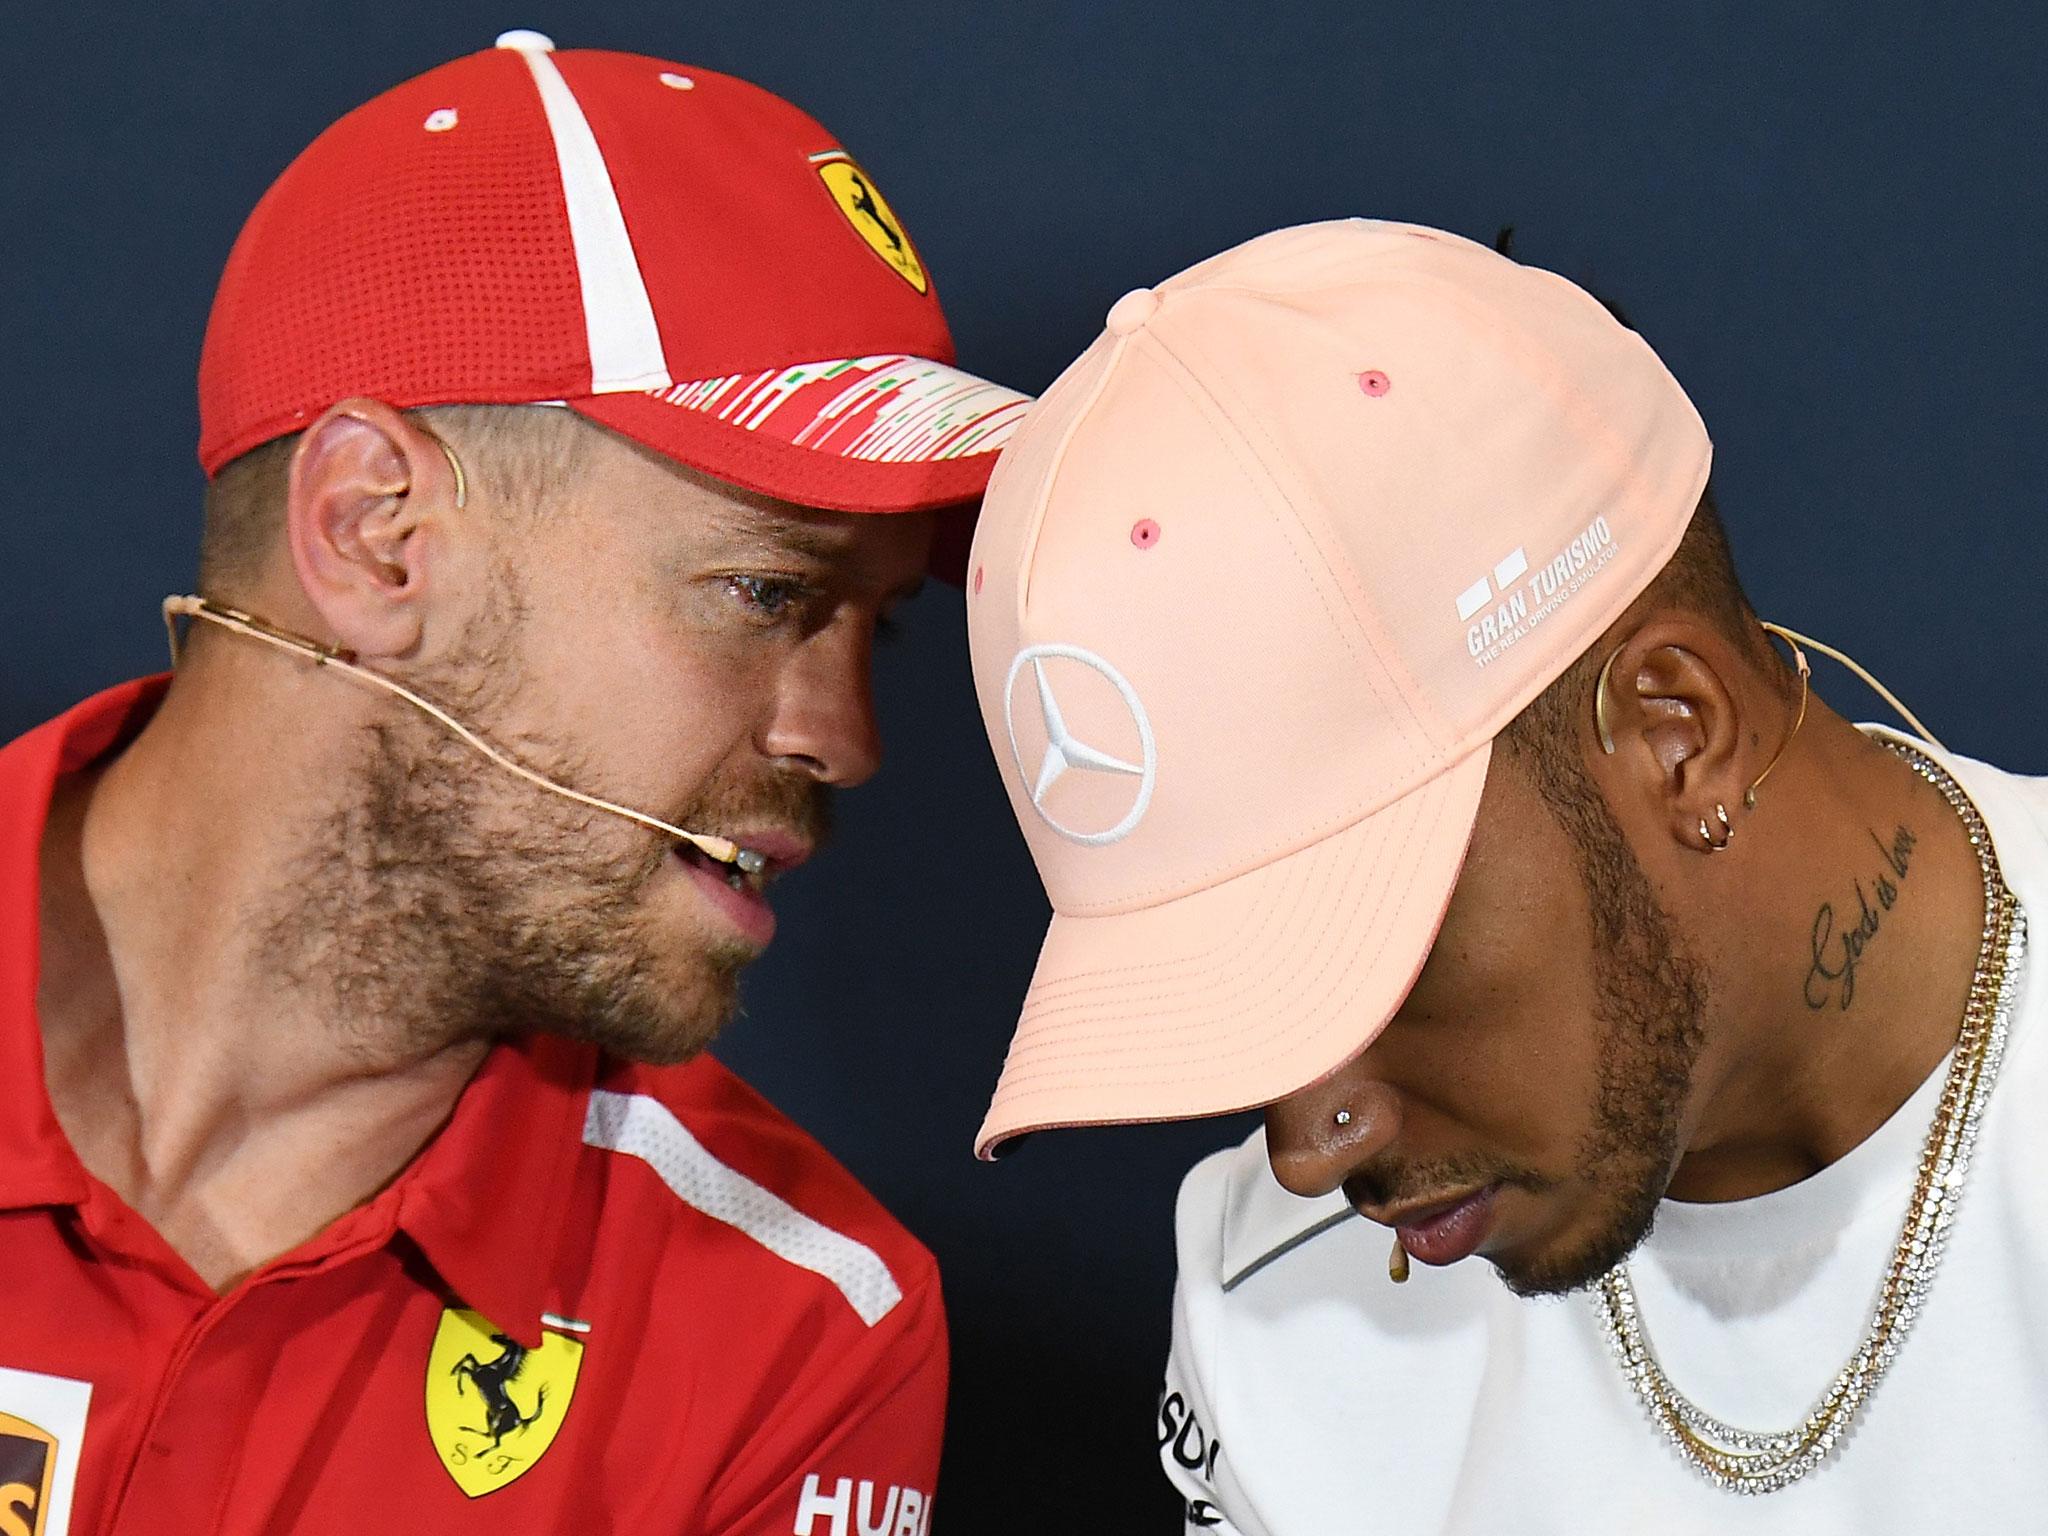 Hamilton has been linked with a move to Ferrari